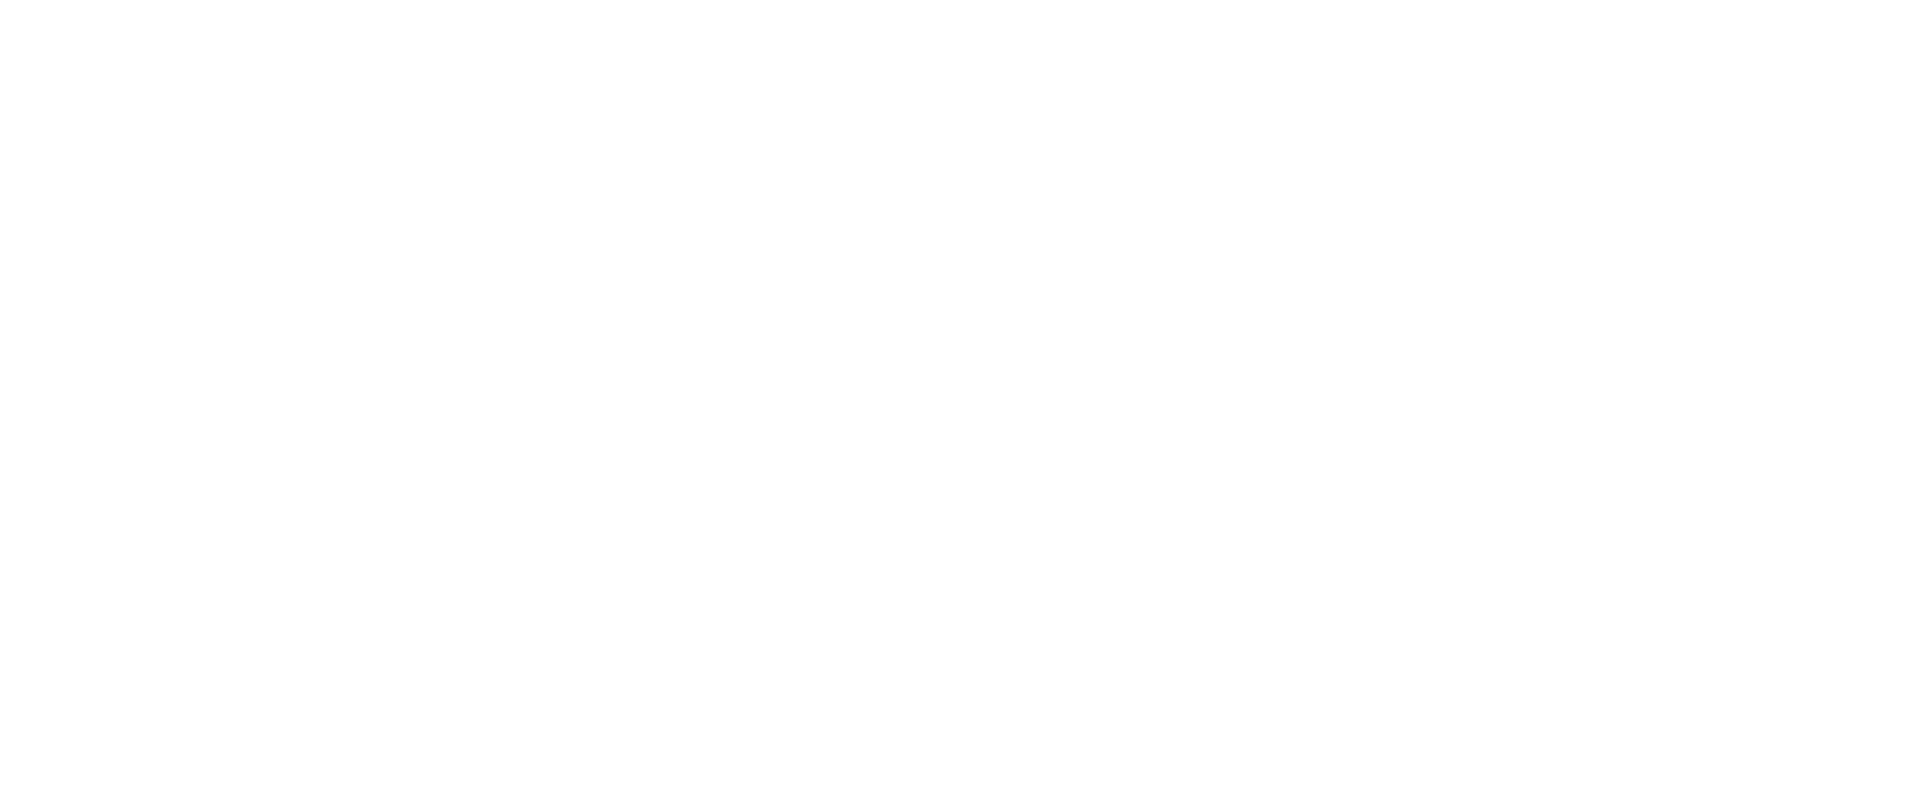 Majestic $100 Off Any Plumbing Service or Electric Service